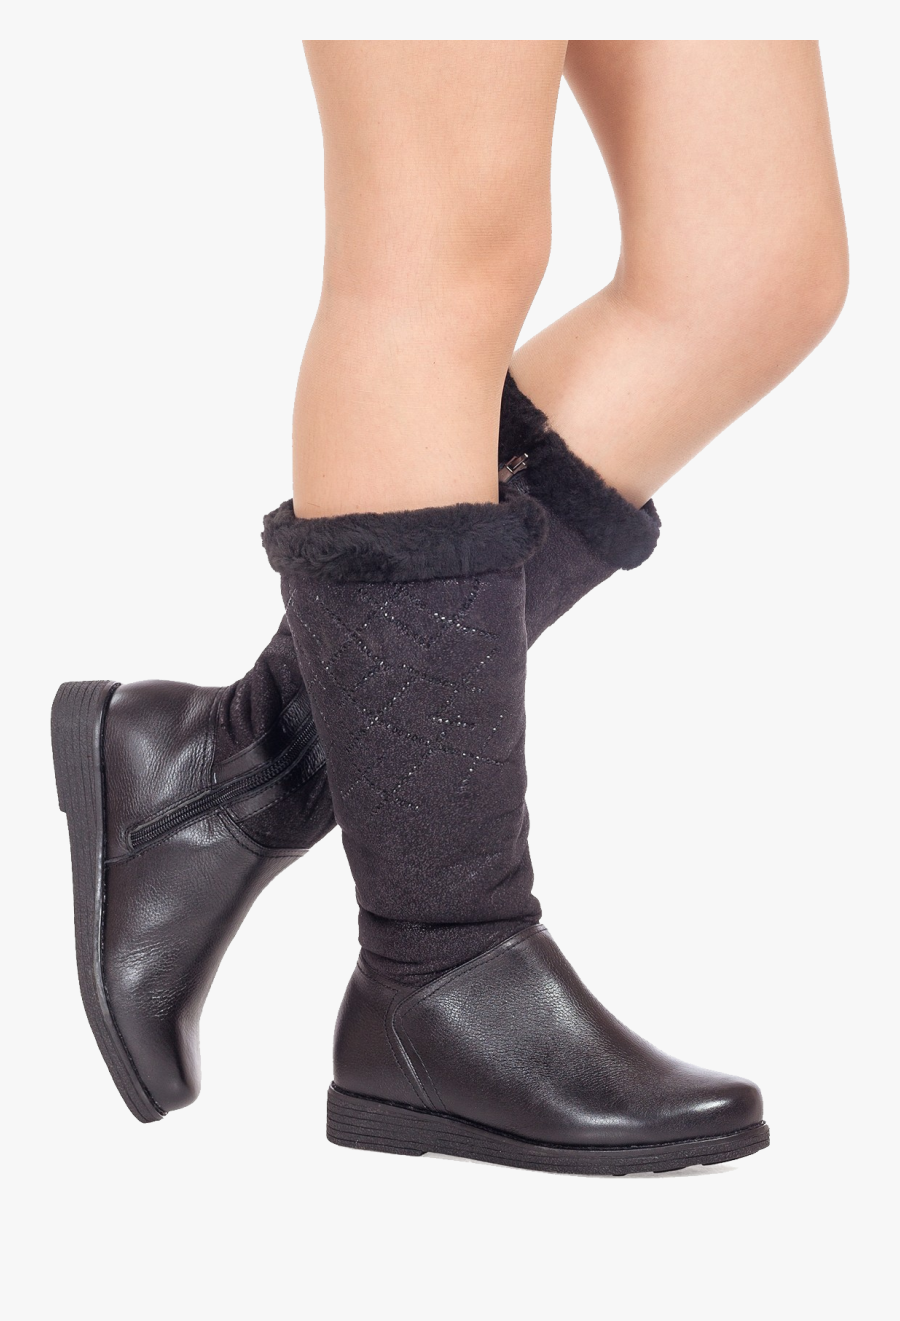 Download This High Resolution Boots Icon Clipart - Legs & Boots Transparent, Transparent Clipart